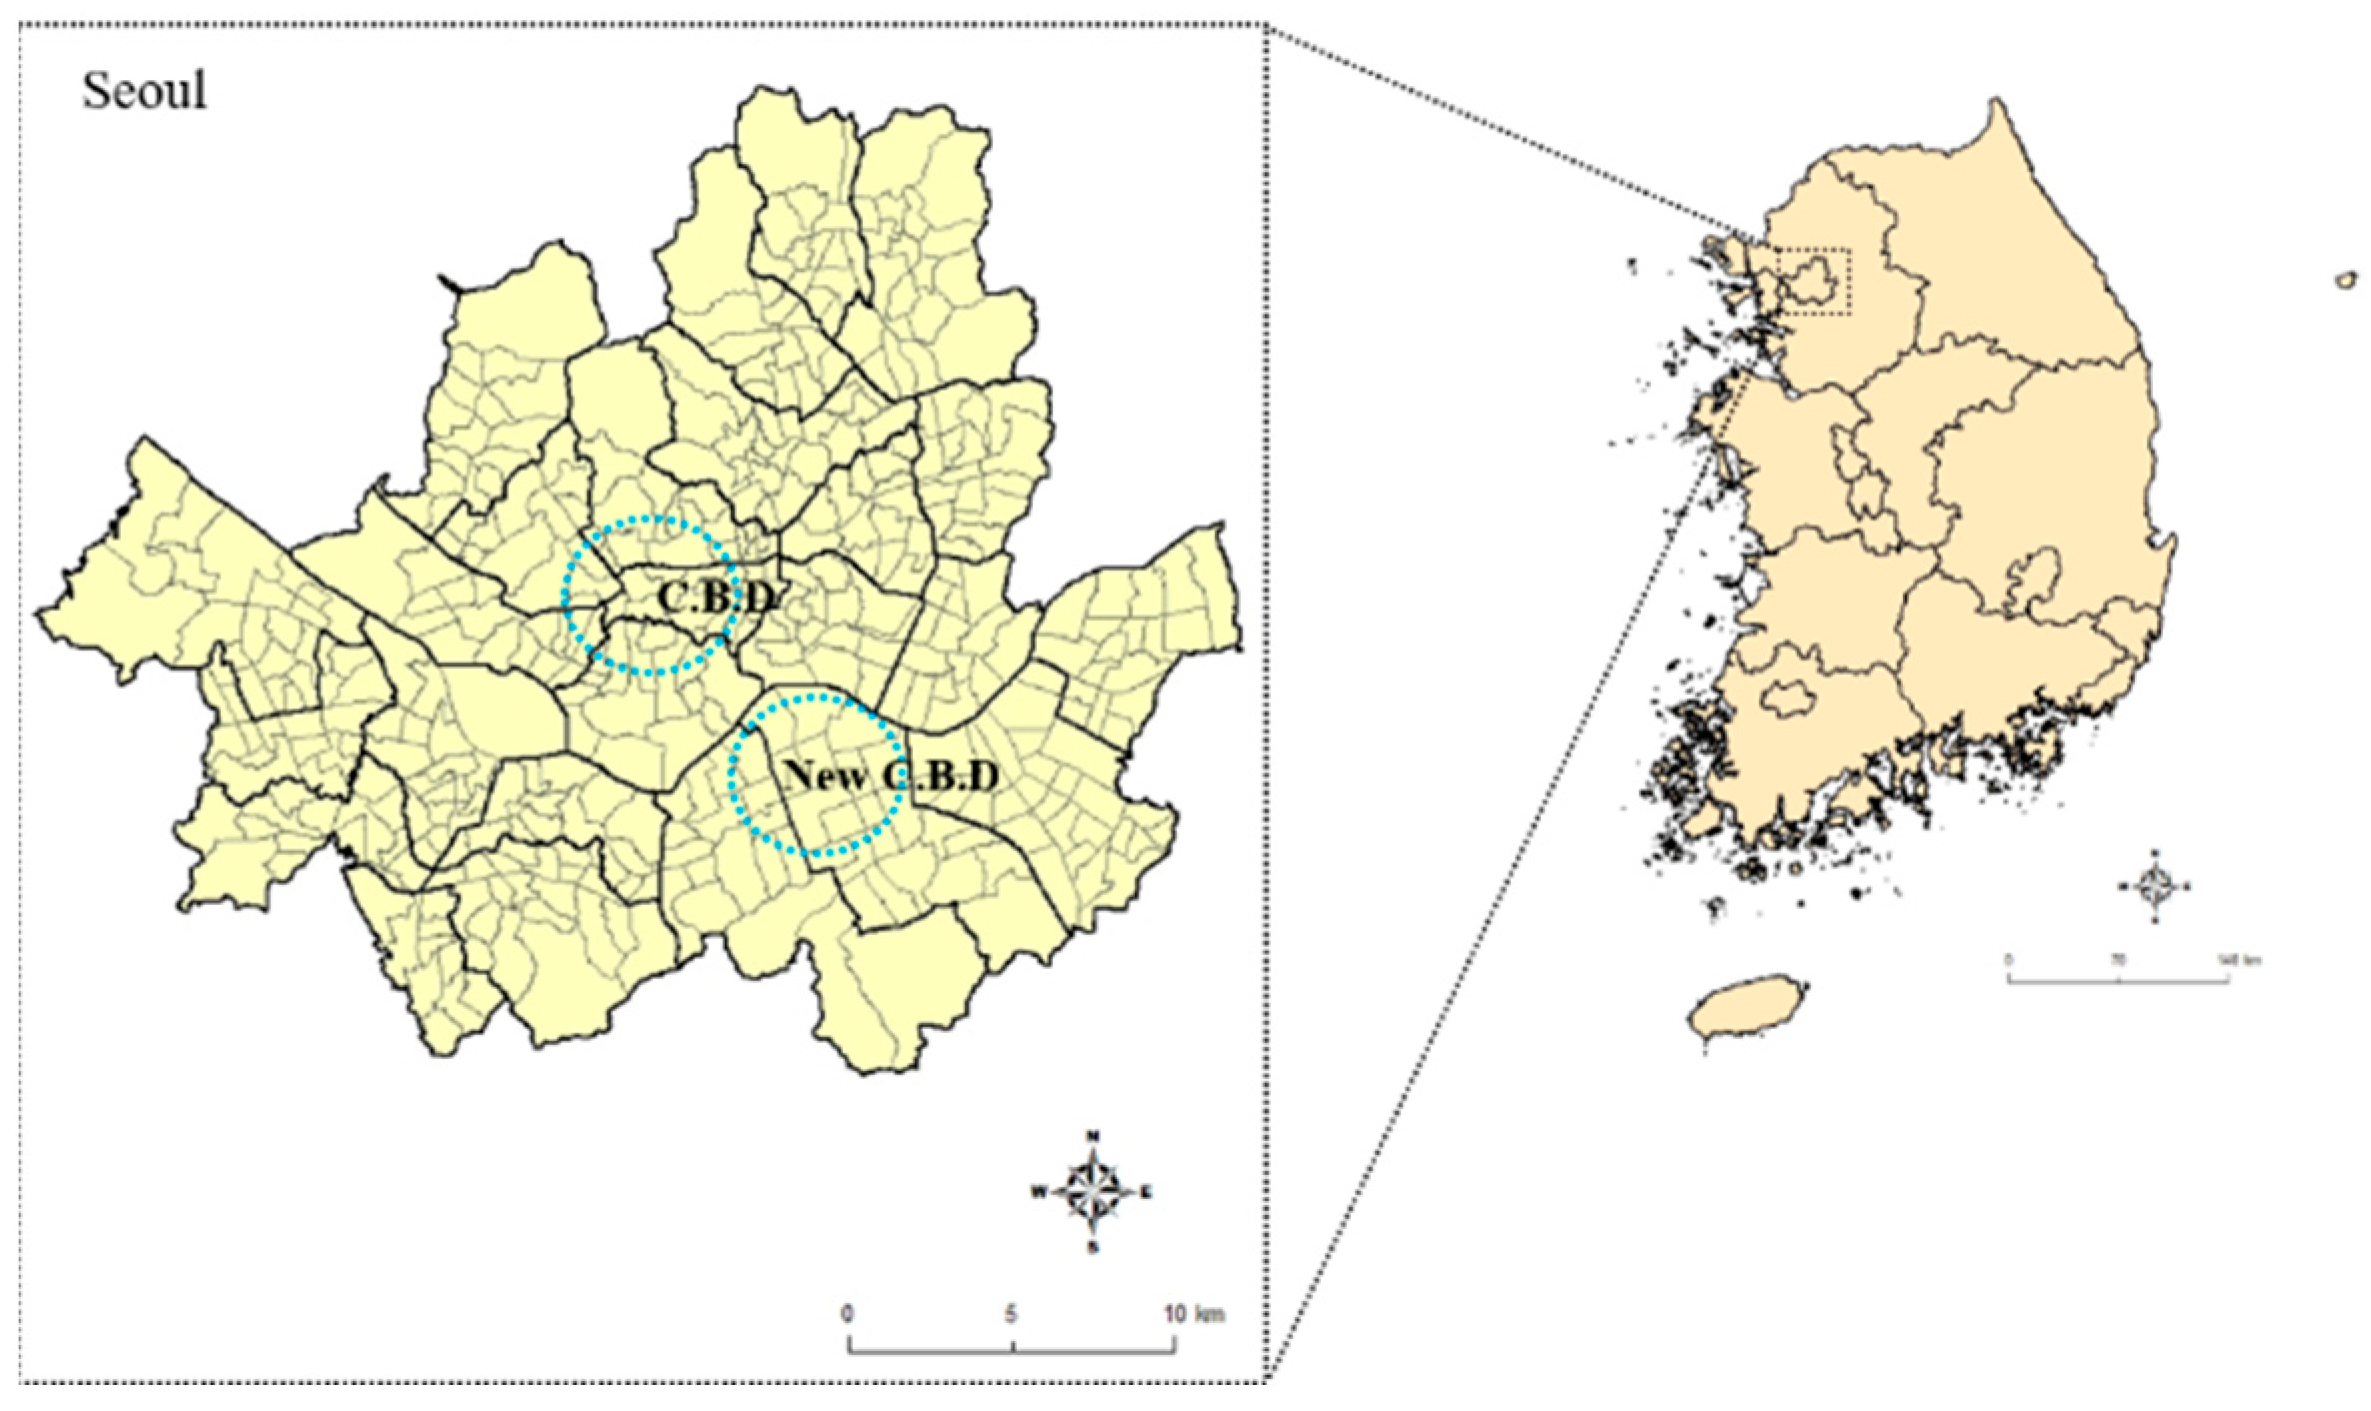 Sustainability | Free Full-Text | Examining the Impact of E-Commerce Growth  on the Spatial Distribution of Fashion and Beauty Stores in Seoul | HTML